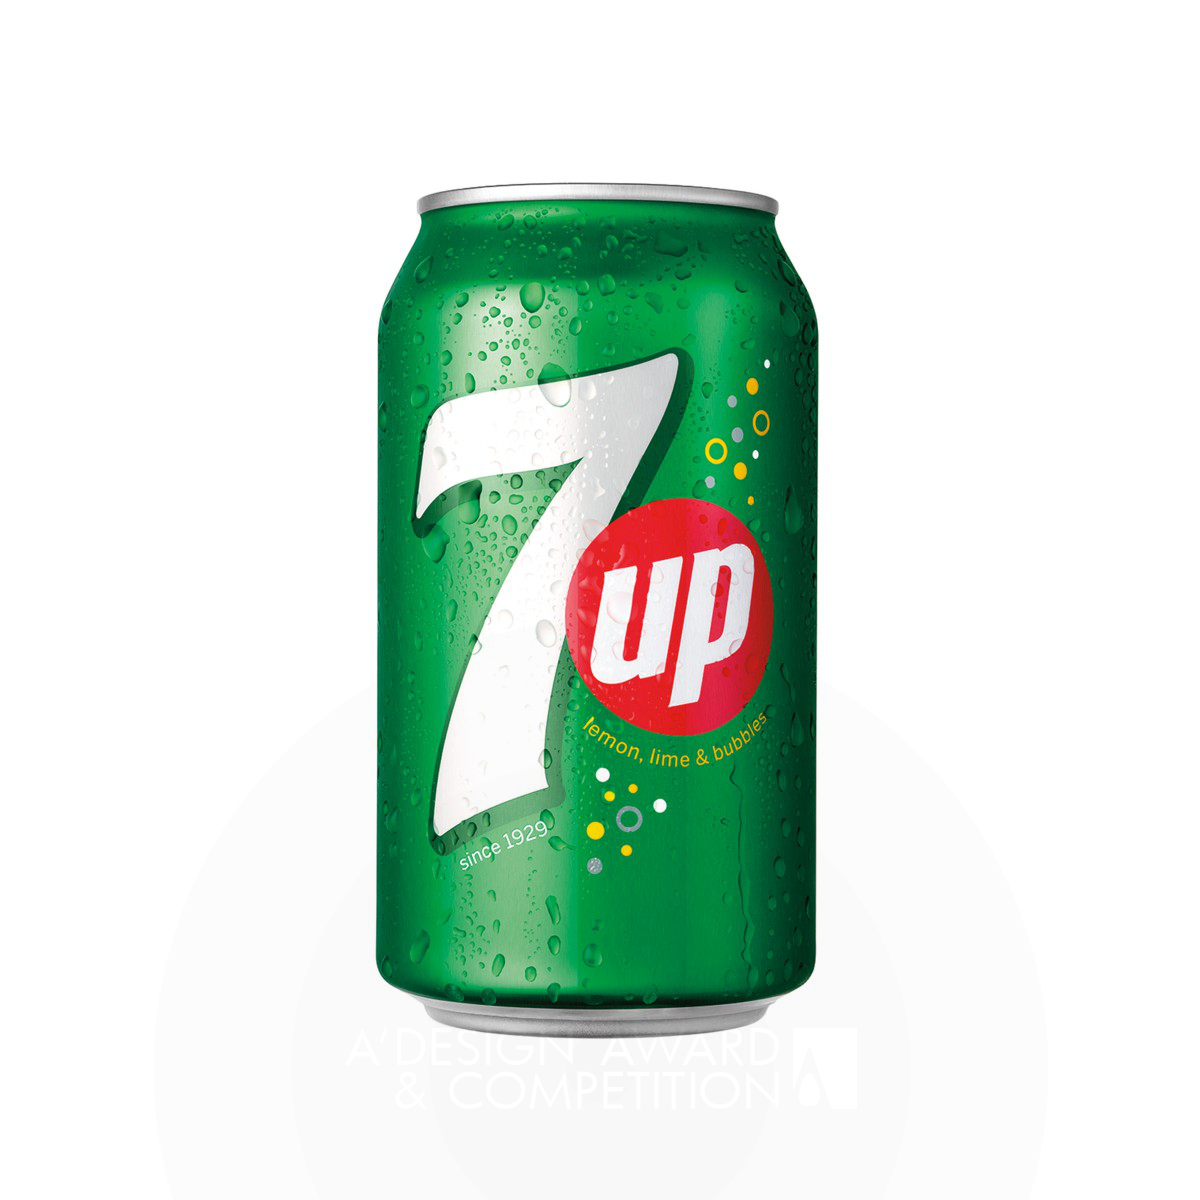 7UP Global VIS Redesign Visual Identity System by PepsiCo Design and Innovation